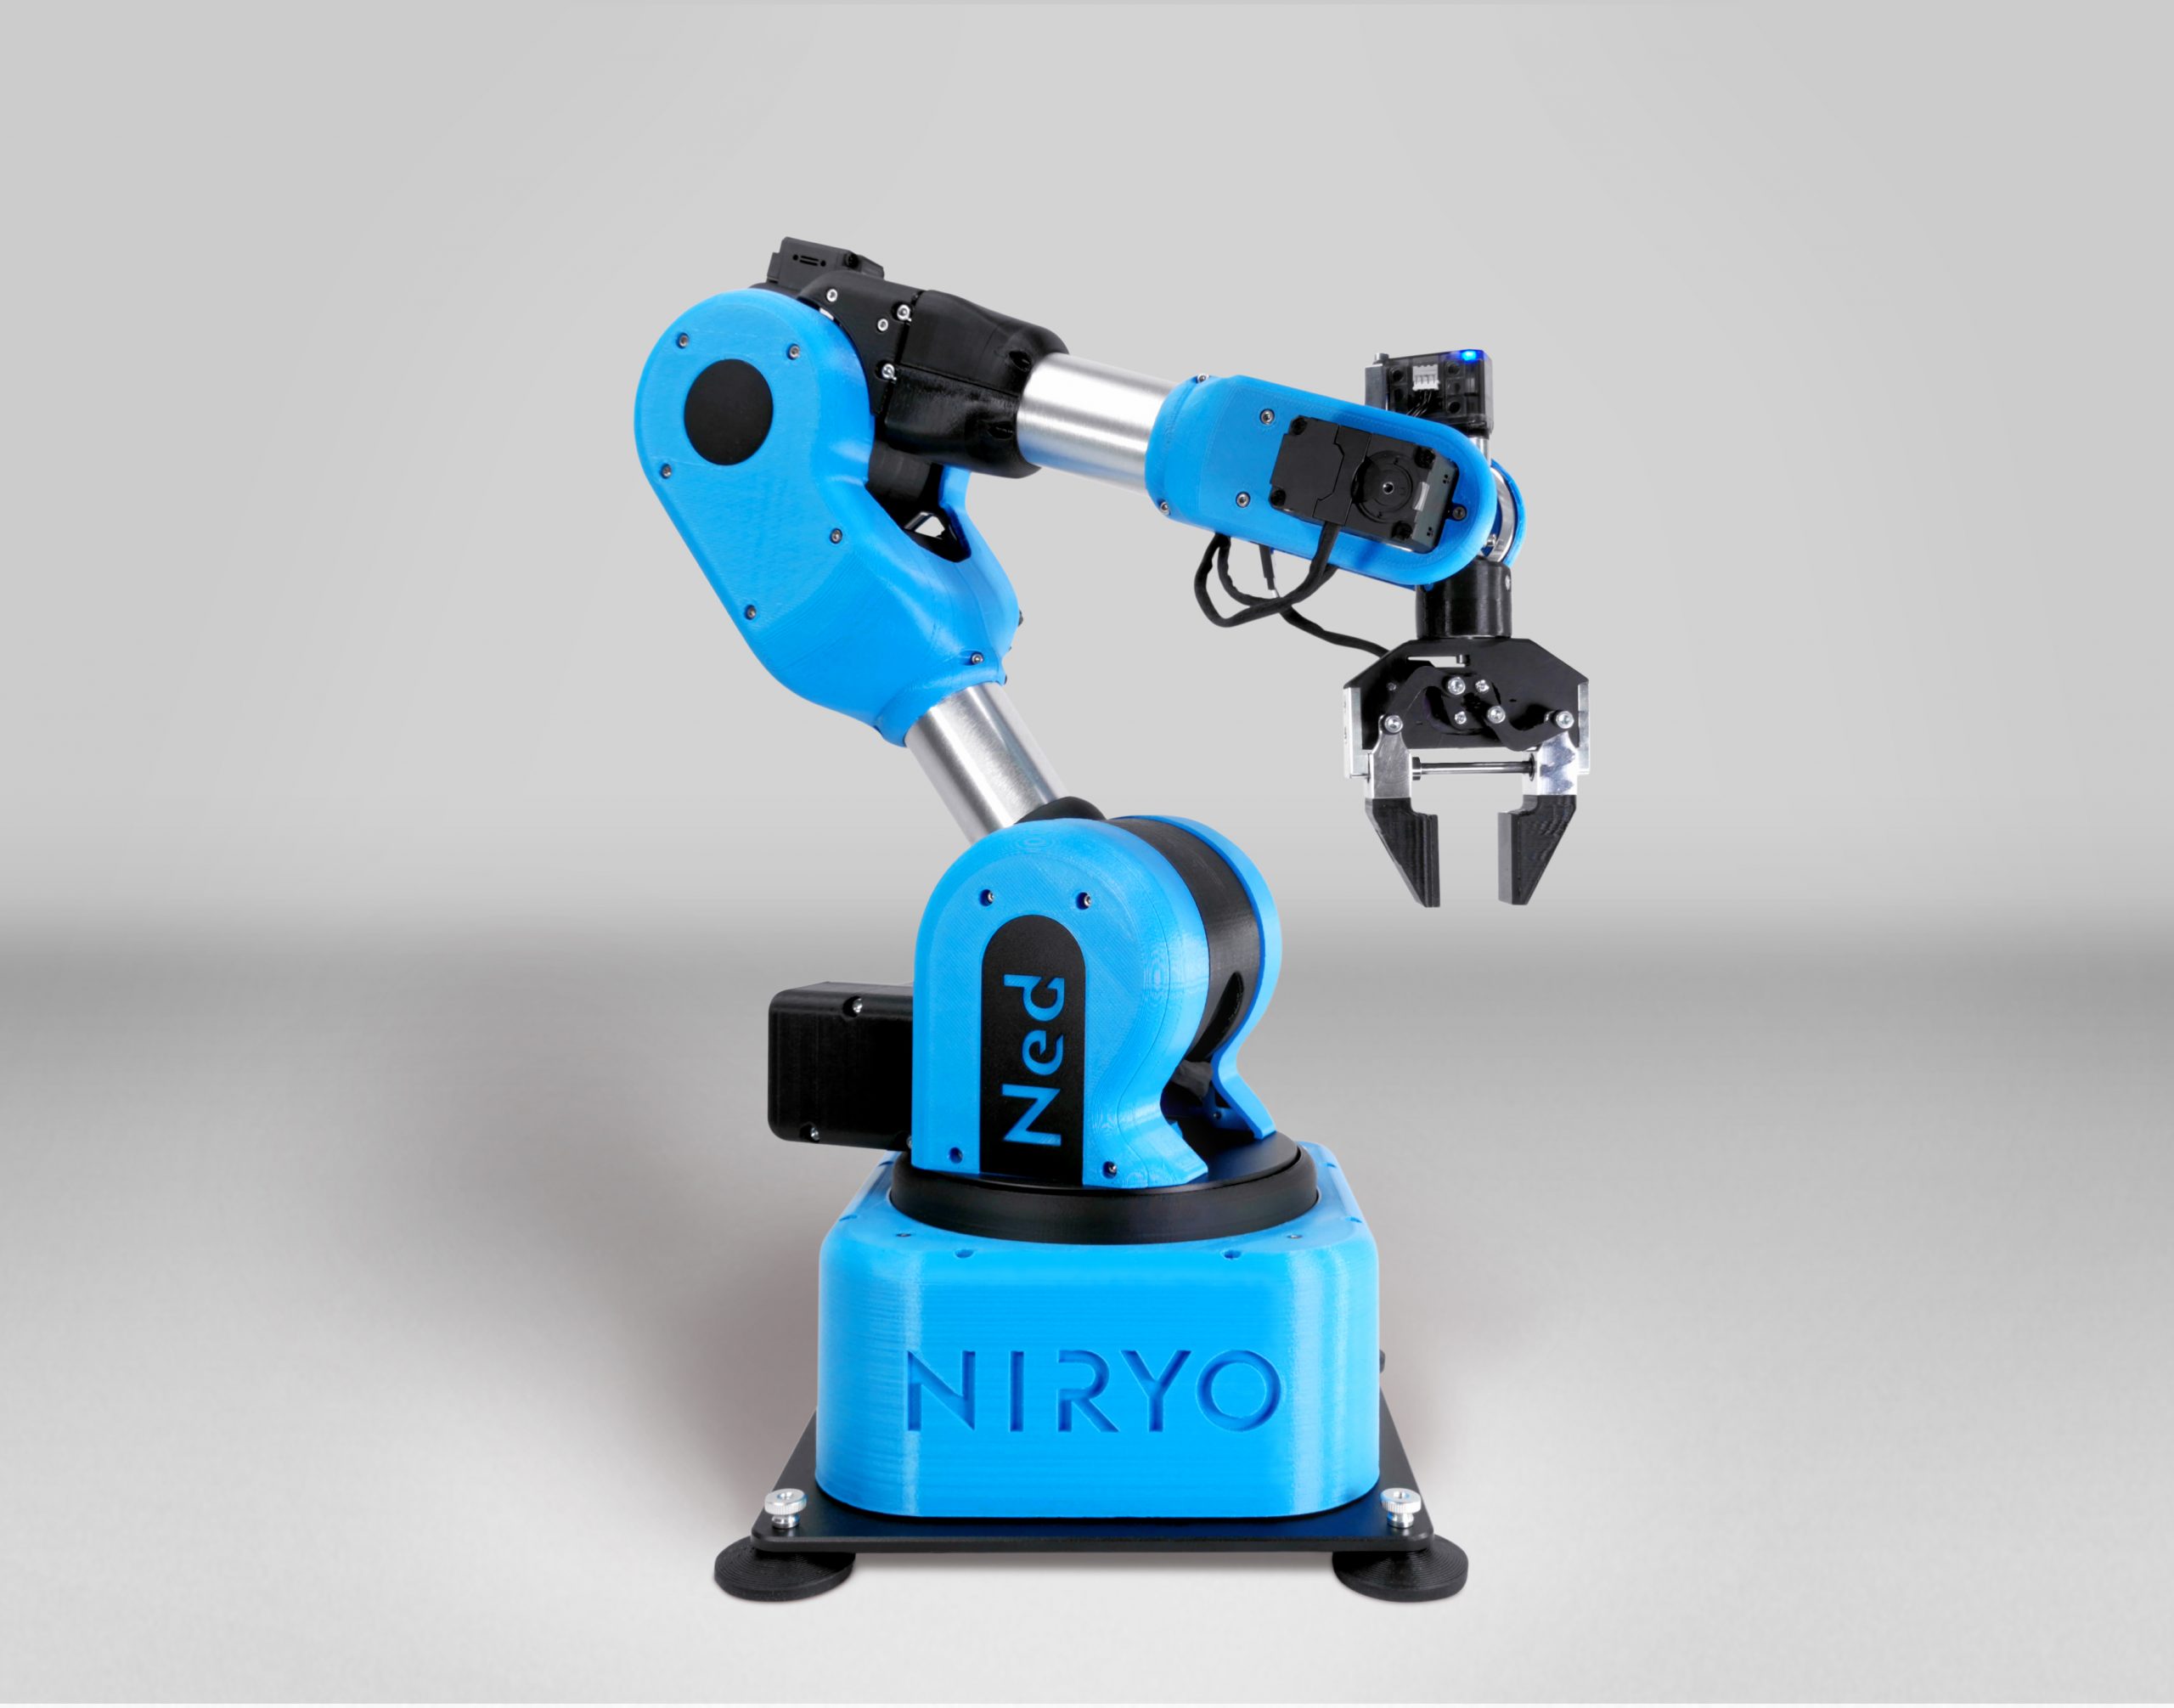 NED Robot a NEW - low cost 6-axis Cobot for Education, Vocational training & Research laboratories